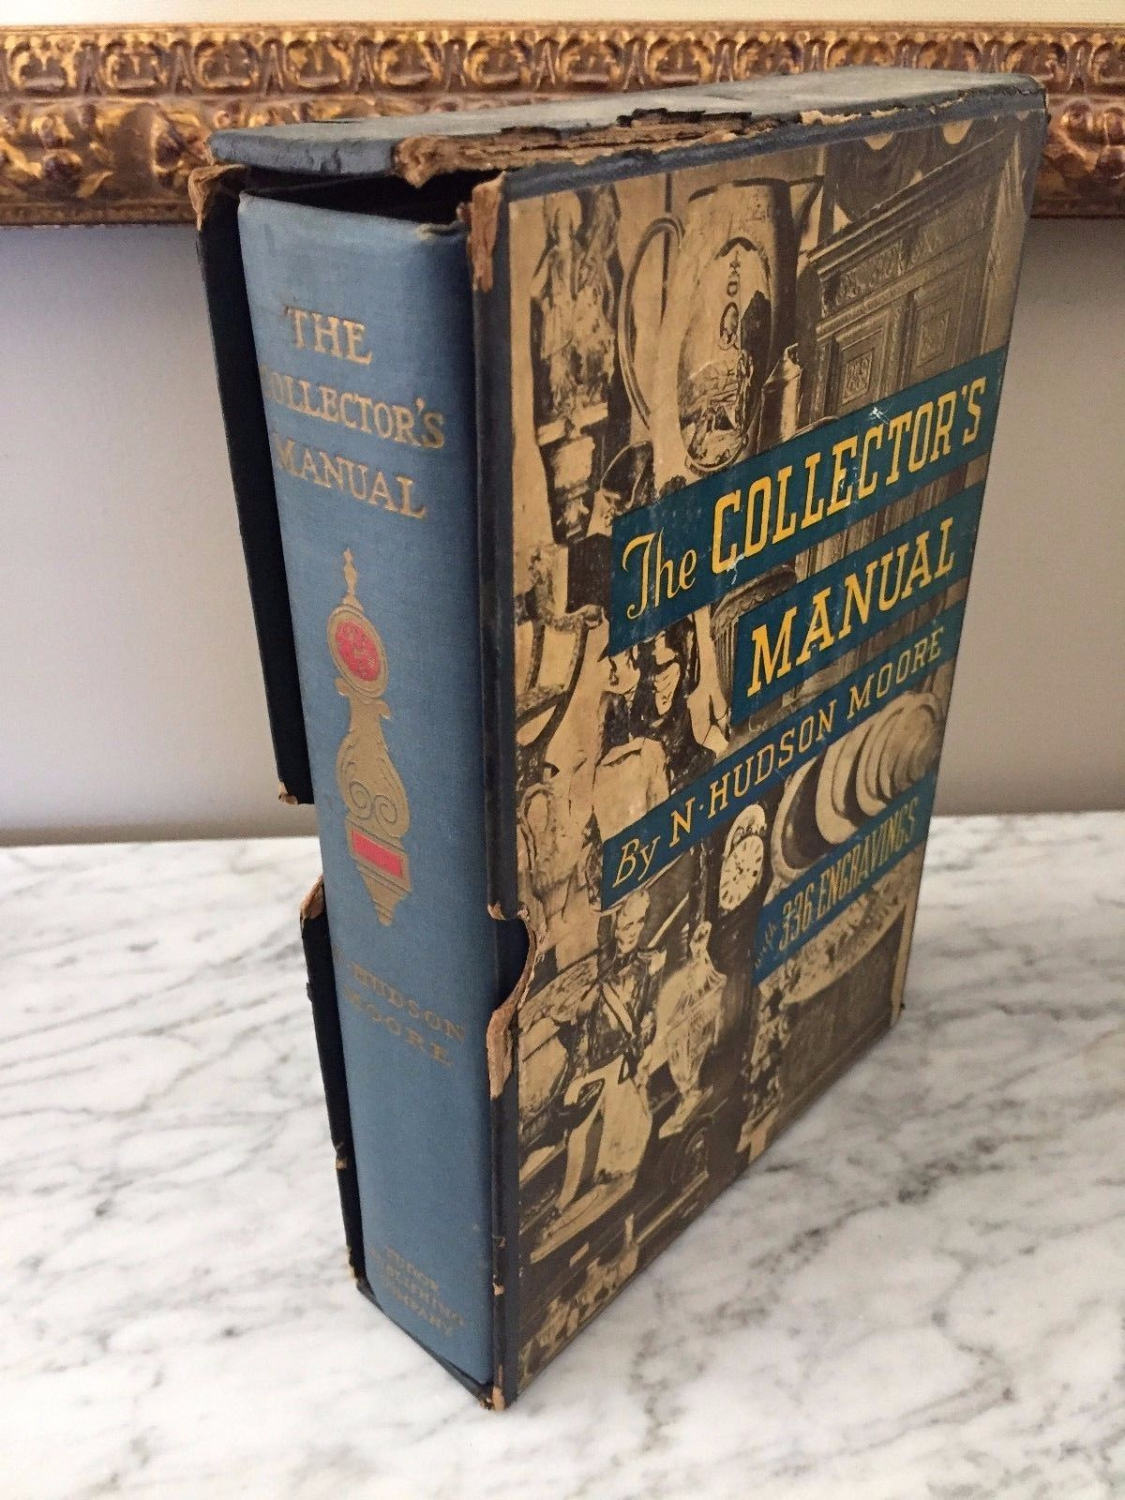 The Collector's Manual, N. Hudson Moore, Illustrated in Original Slipcase, 1935